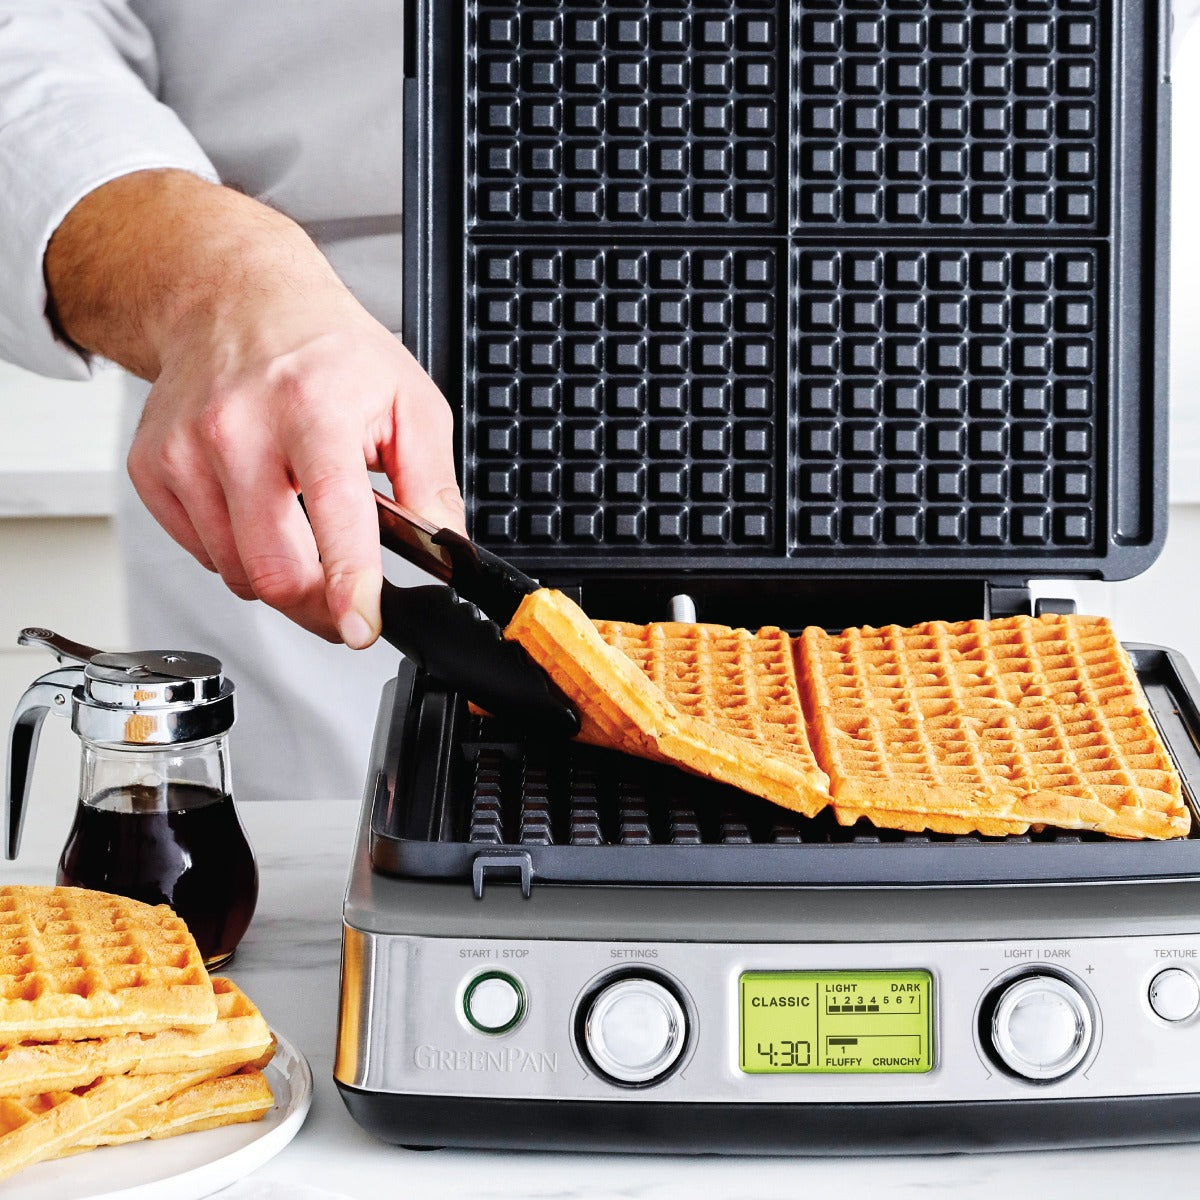 3 in 1 Waffle Maker Unboxing